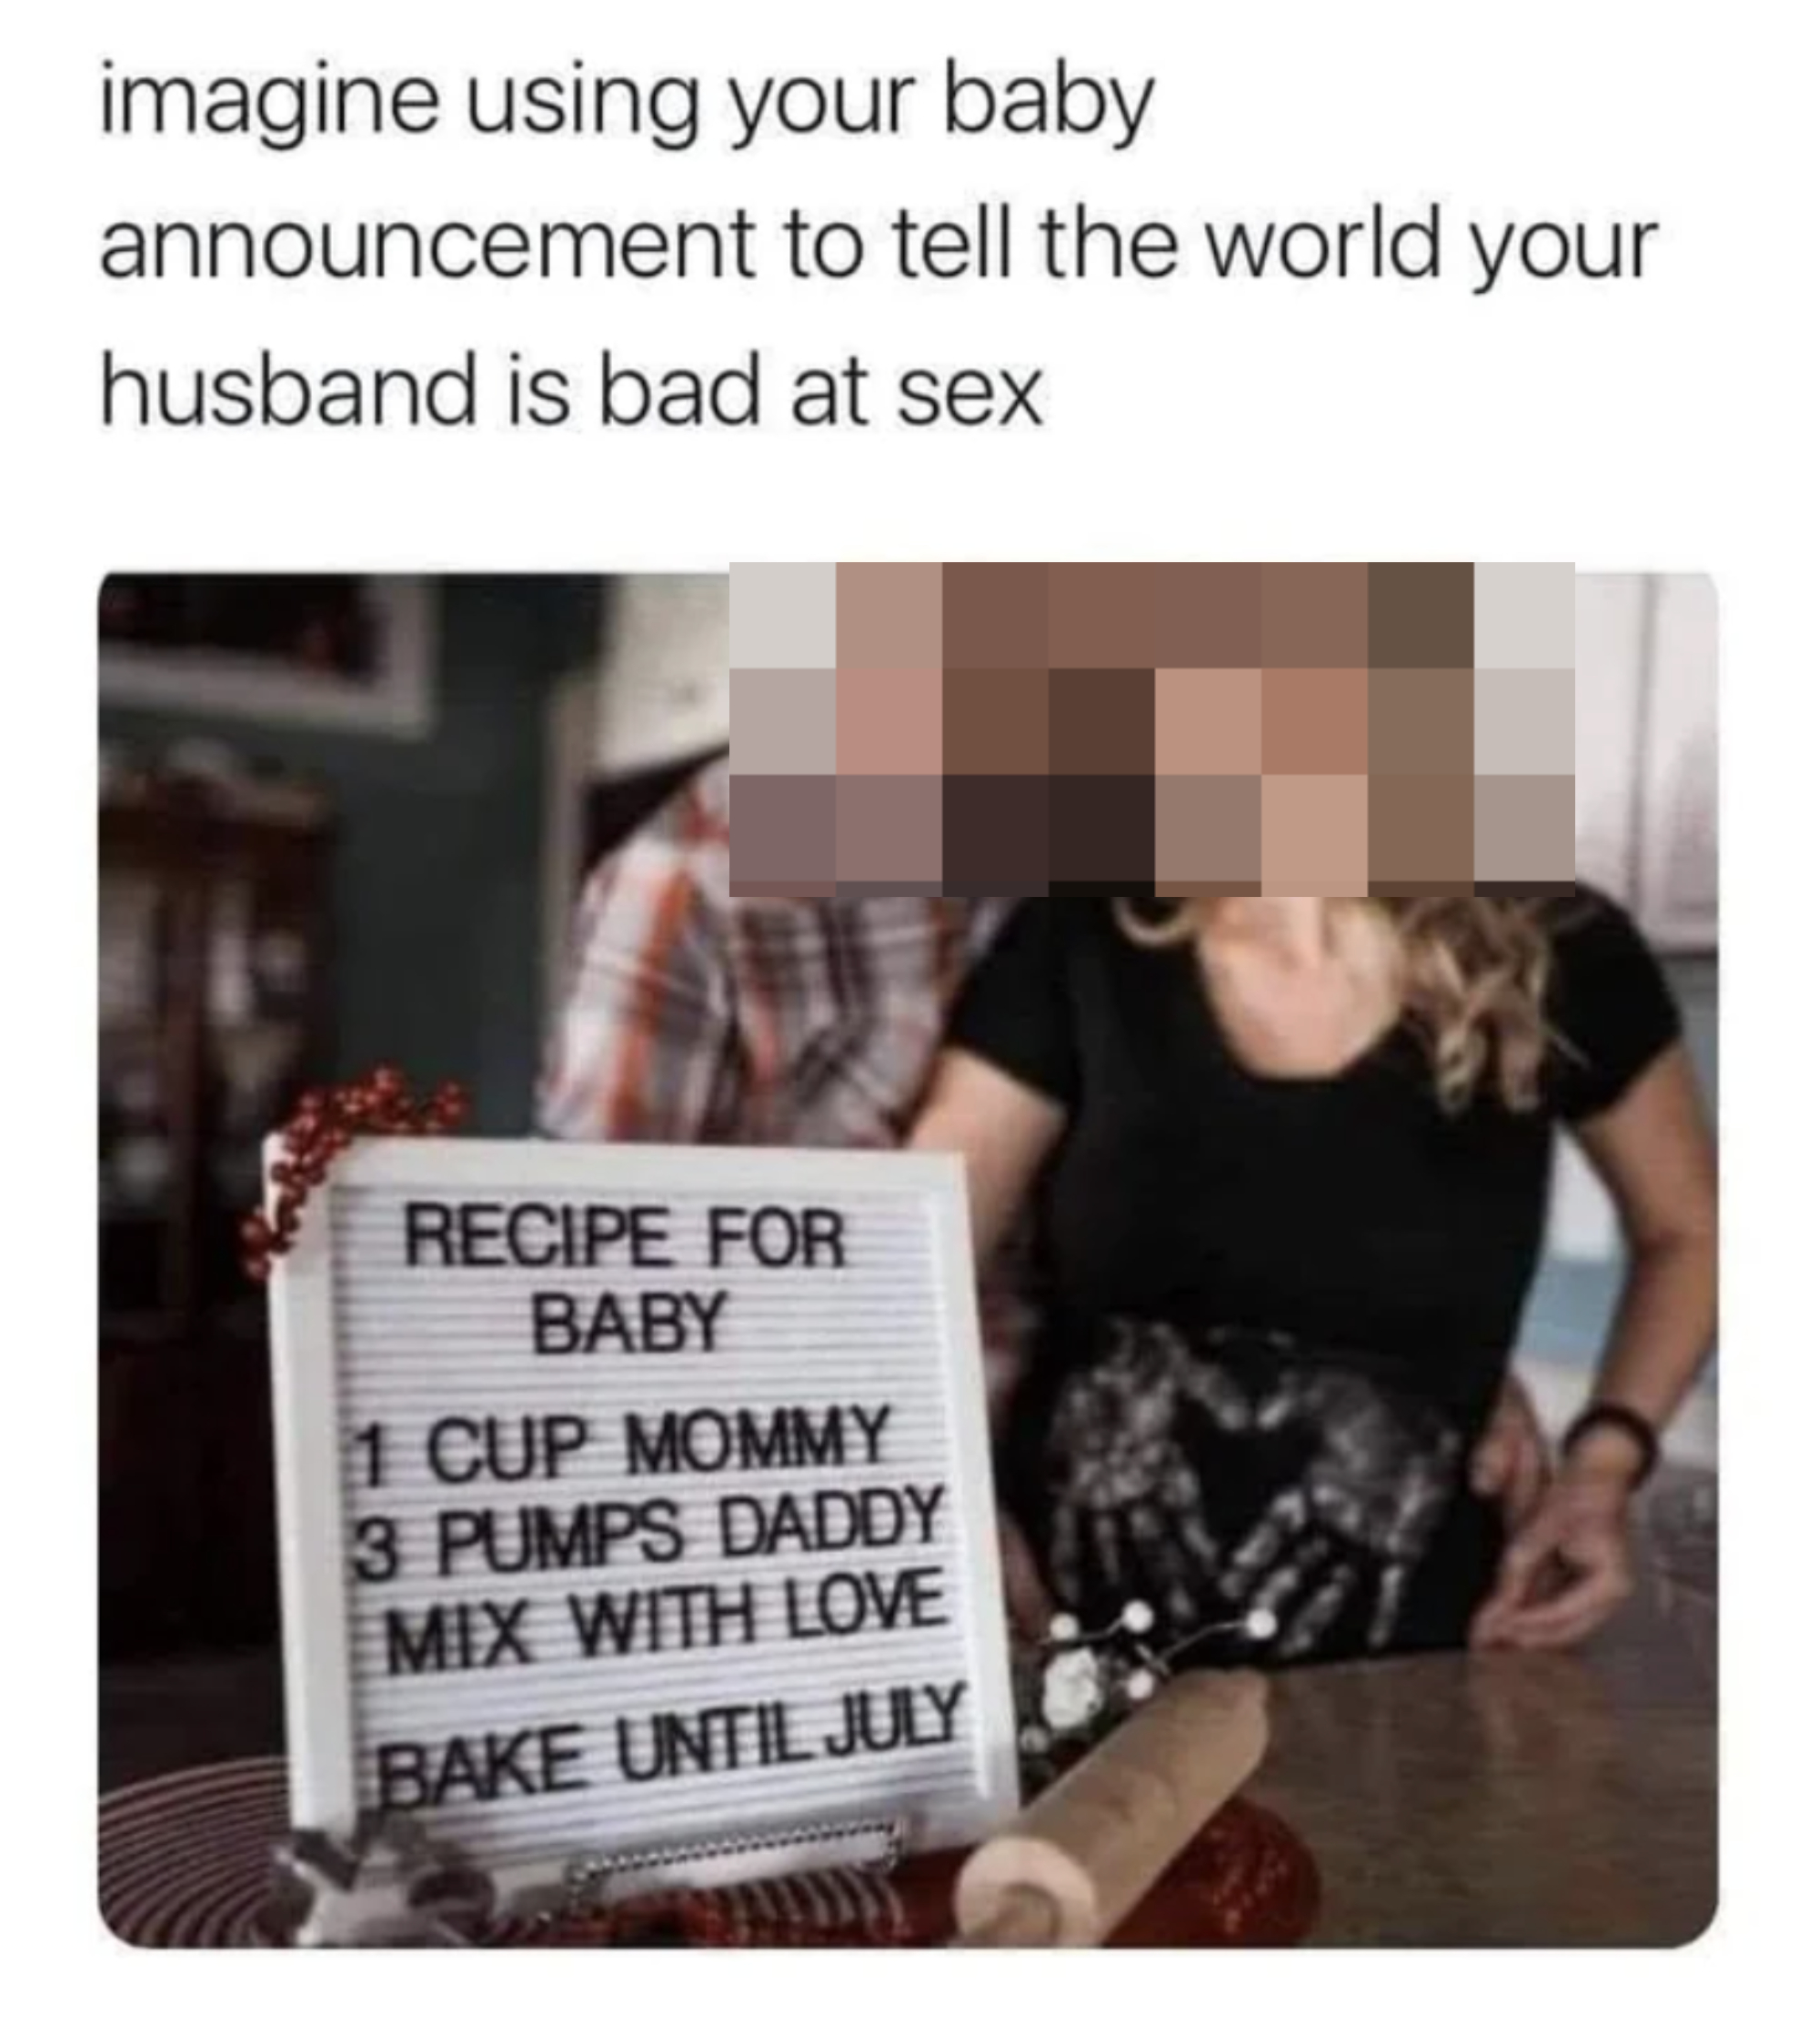 A pregnancy announcement that says &quot;recipe for baby: 1 cup mommy, 3 pumps daddy, mix with love, bake until July&quot;